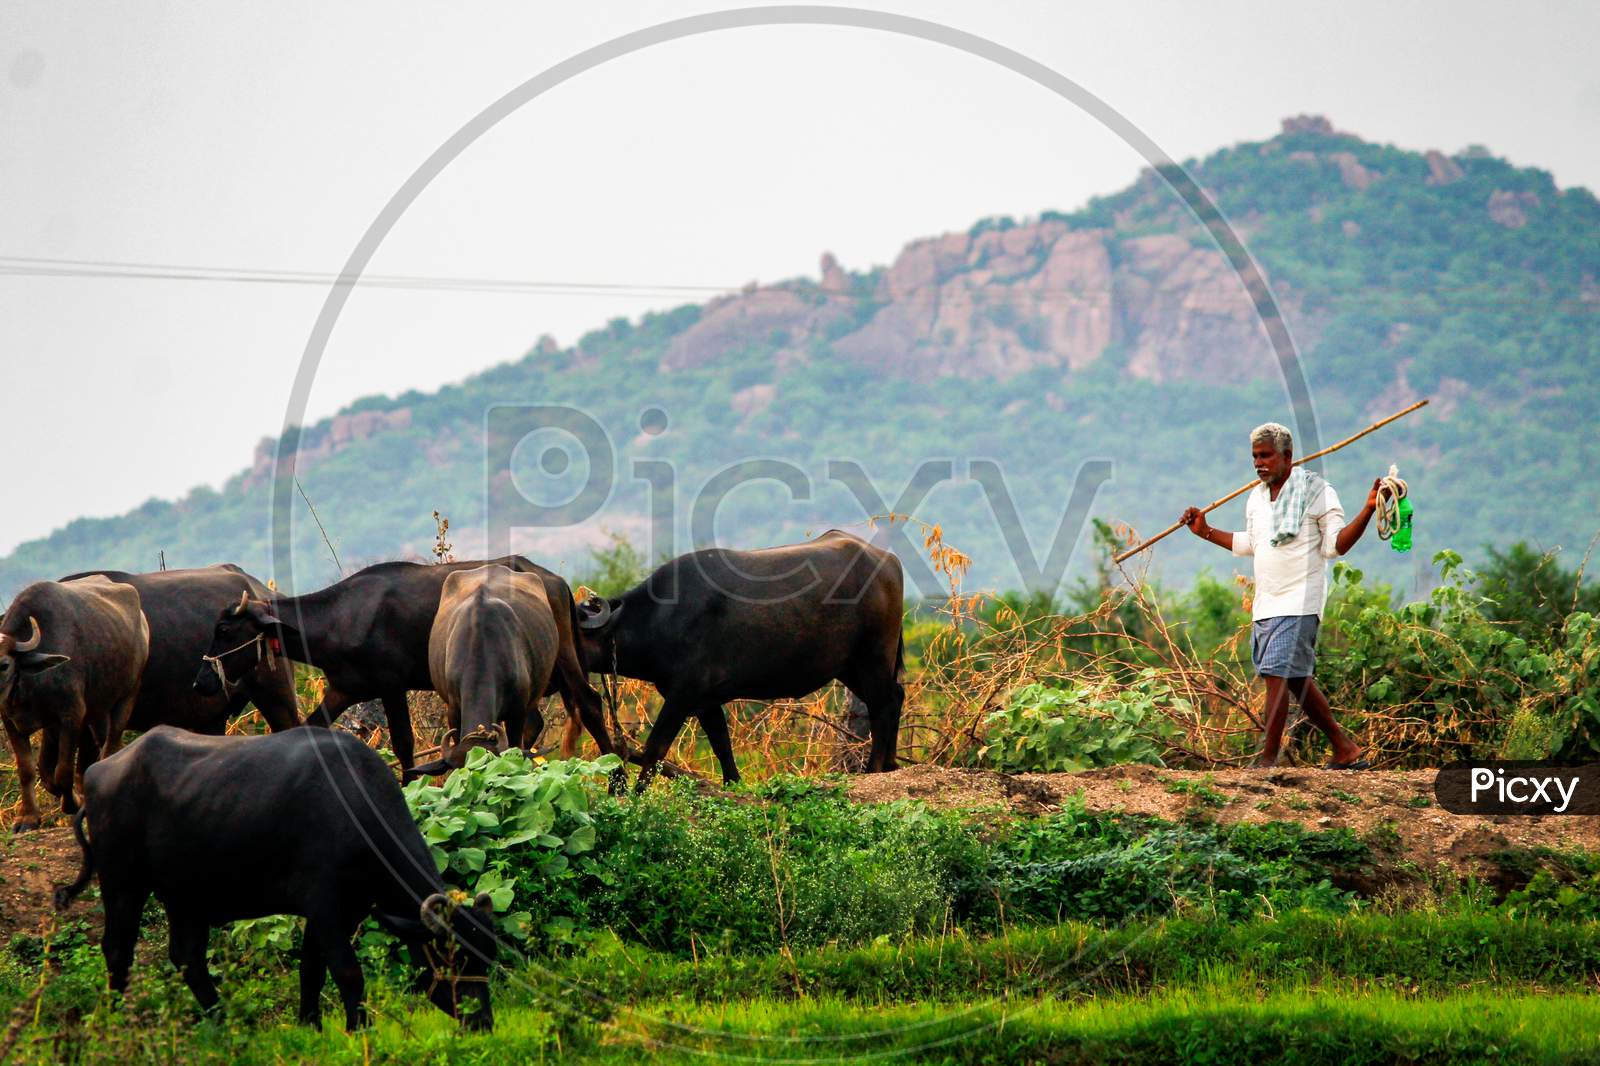 buffalo keeper with his buffaloes in village